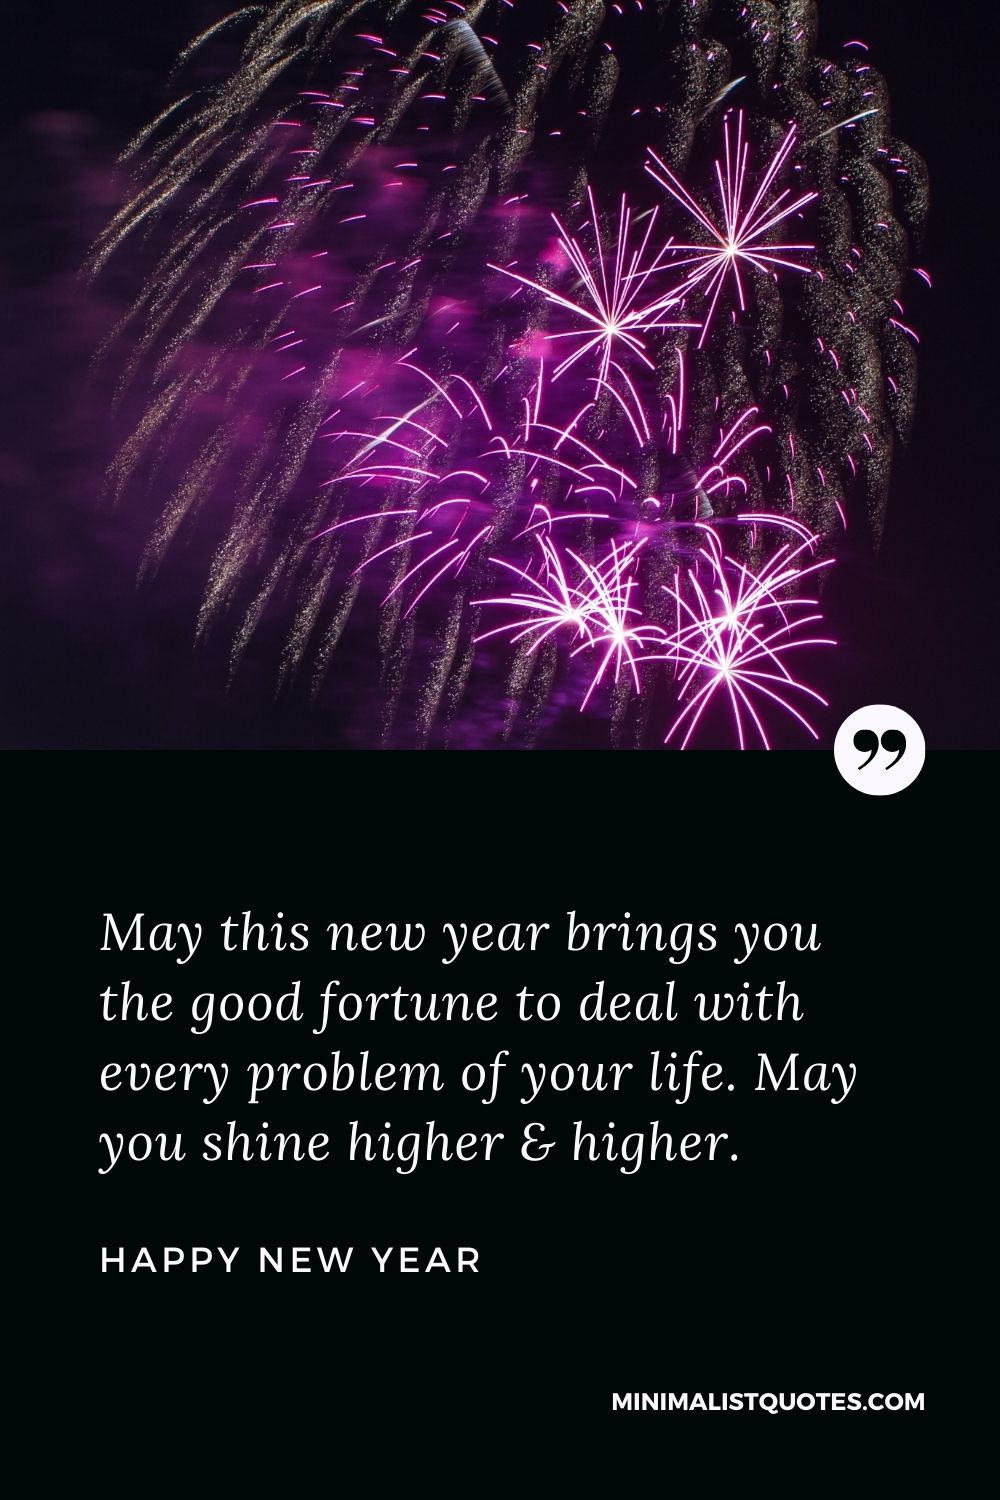 New Year Wish - May this new year brings you the good fortune to deal with every problem of your life. May you shine higher & higher.